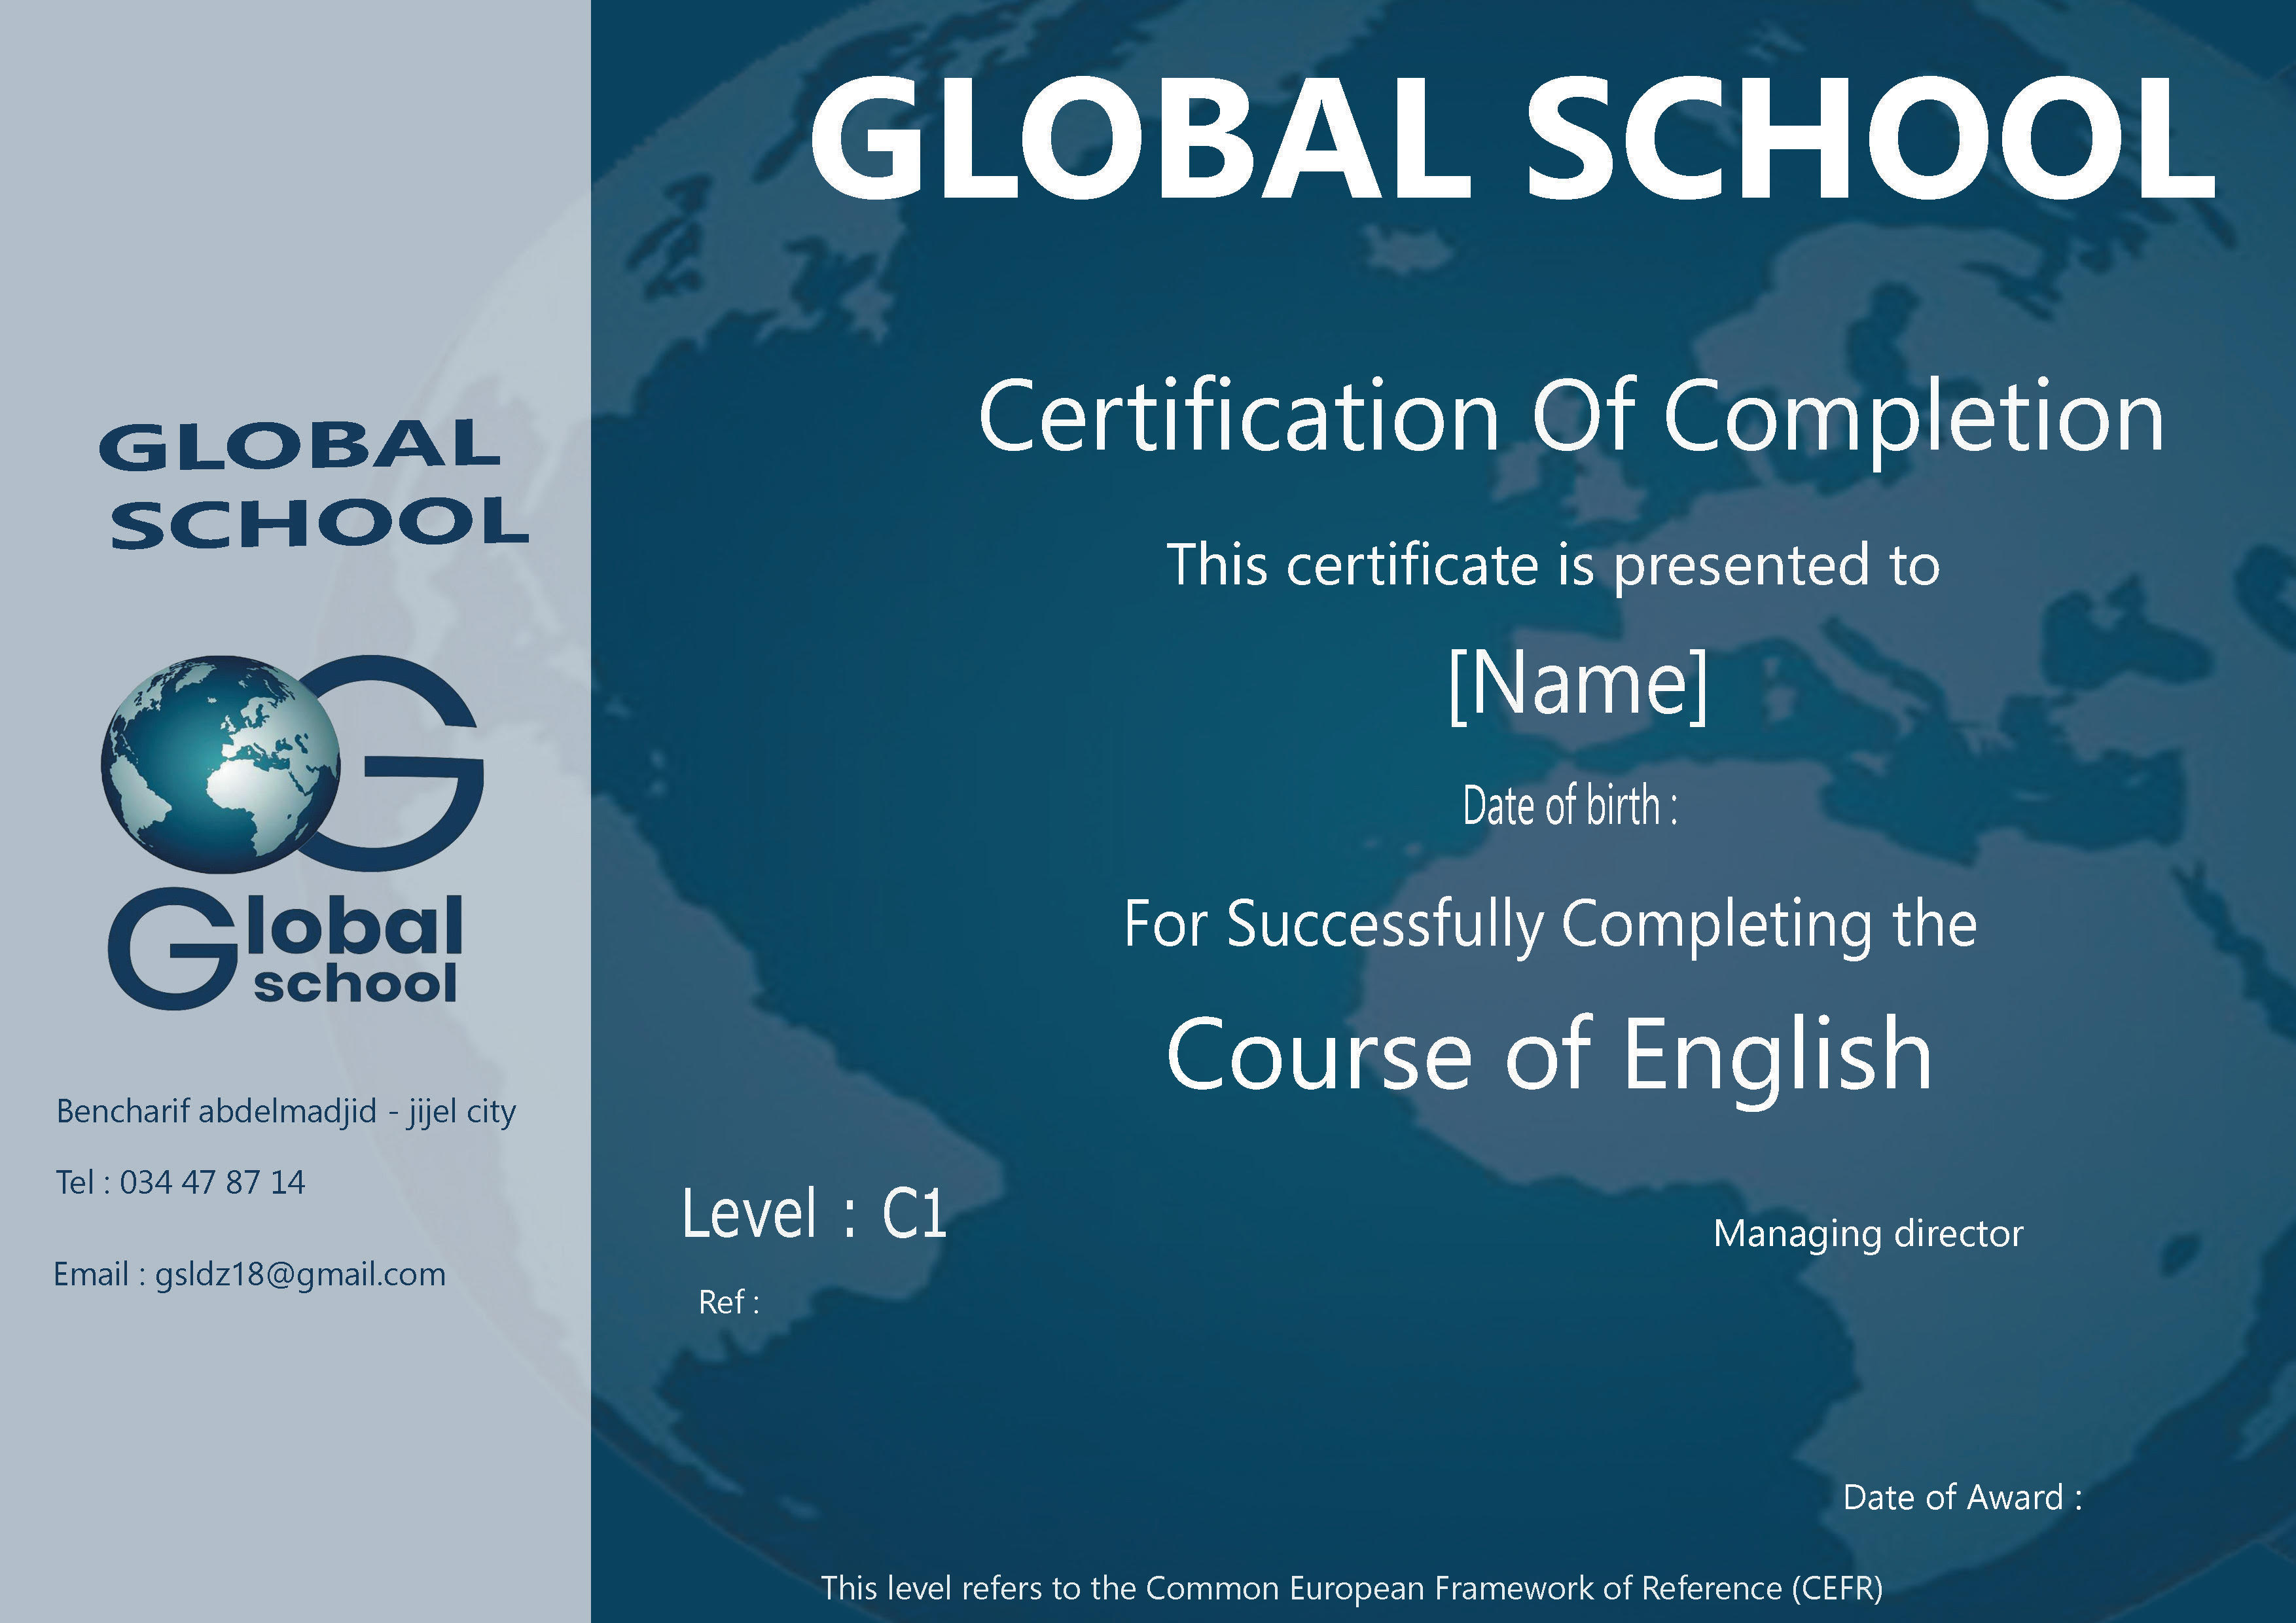 About Global School